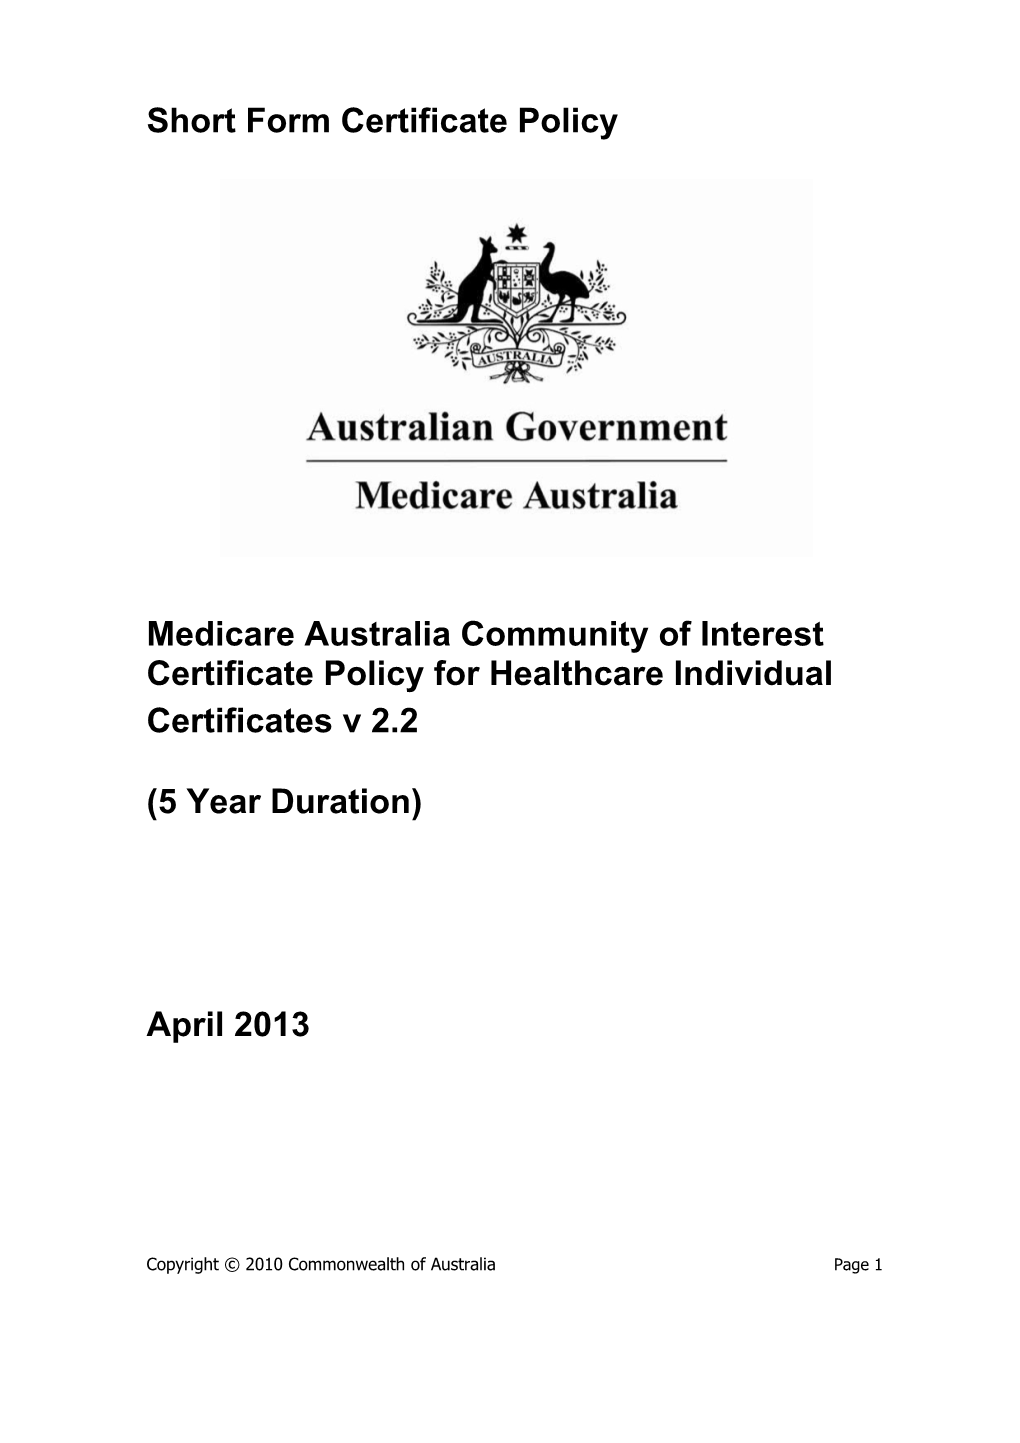 Medicare Australia Community of Interestcertificate Policy for Healthcare Individual